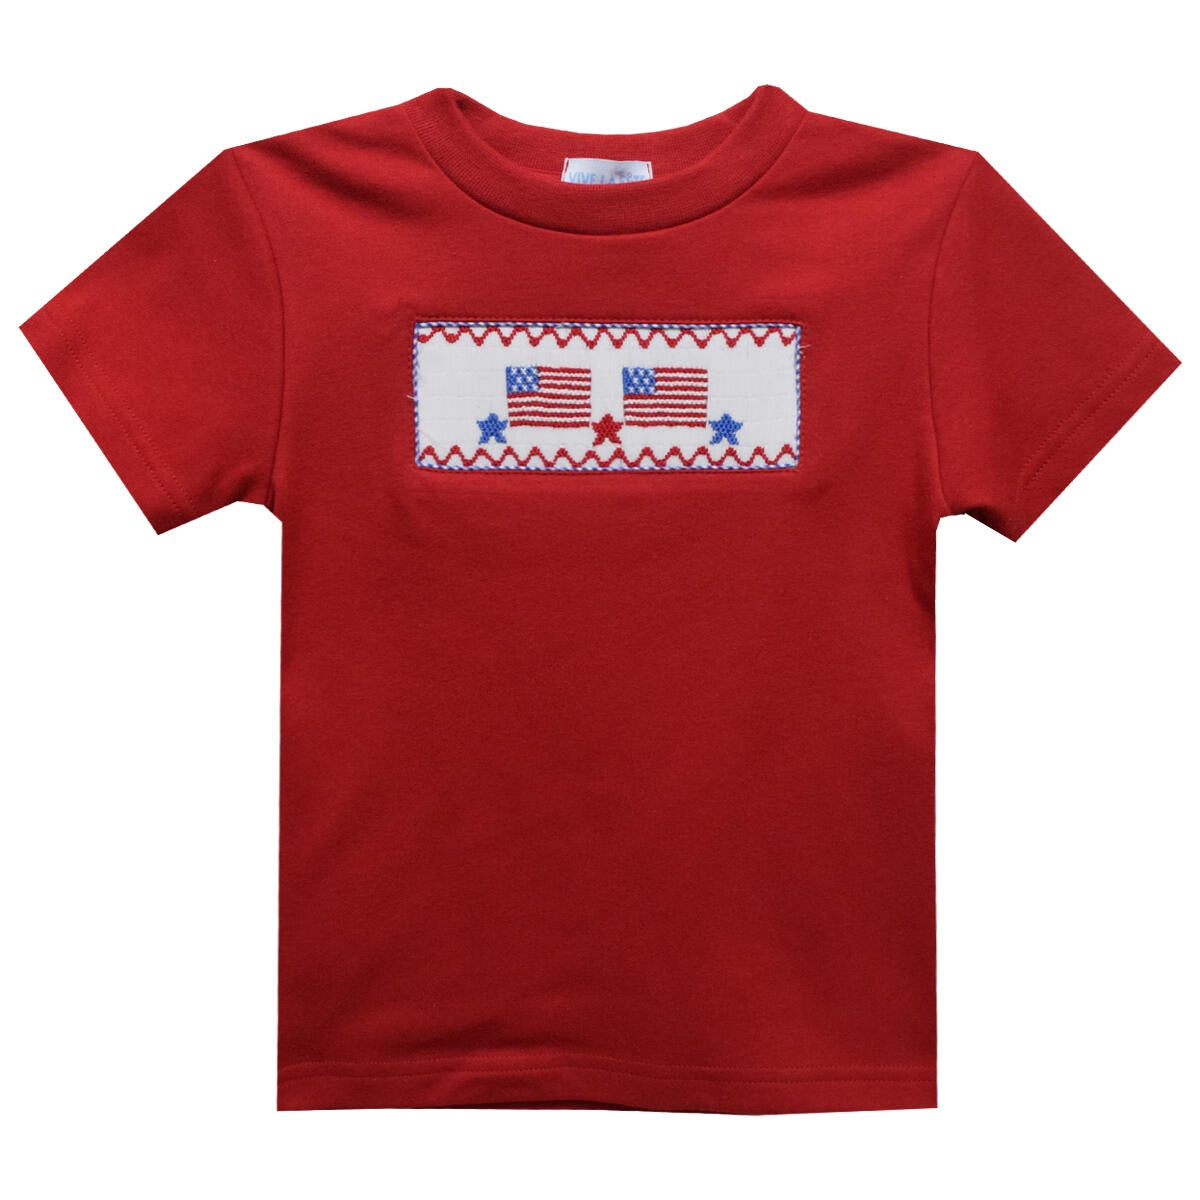 Vive La Fete 4th of July Smocked Red Boys Tee  5103